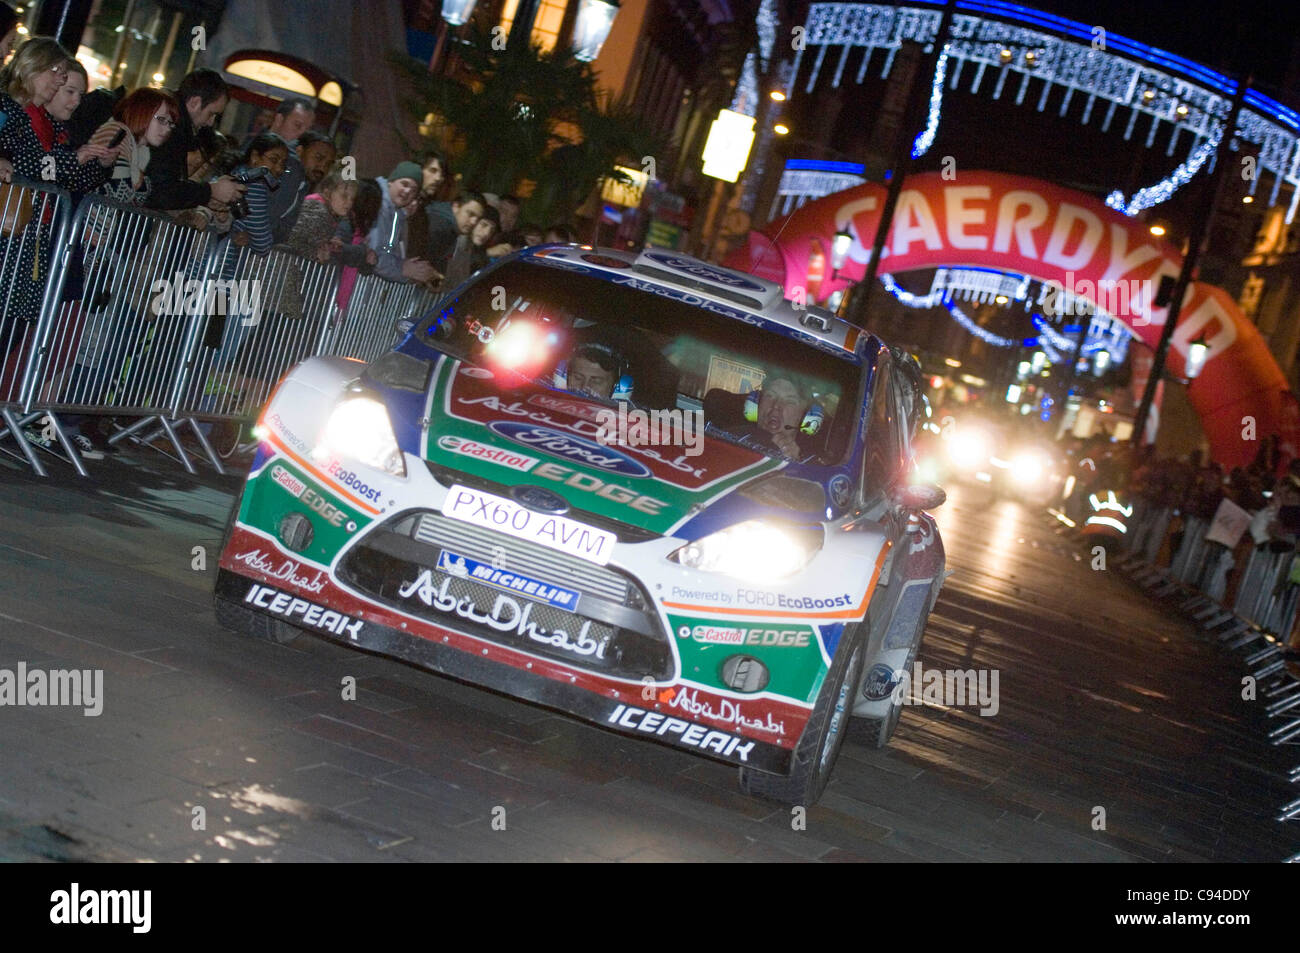 Jari-Matti Latvala (Finland) and his co-Driver Mikka Anttila (Finland) in their Ford Abu Dhabi World Rally Team Ford Fiesta RS WRC making their way through the centre of Cardiiff tonight on day 3 of the FIA WRC Wales Rally GB. Stock Photo